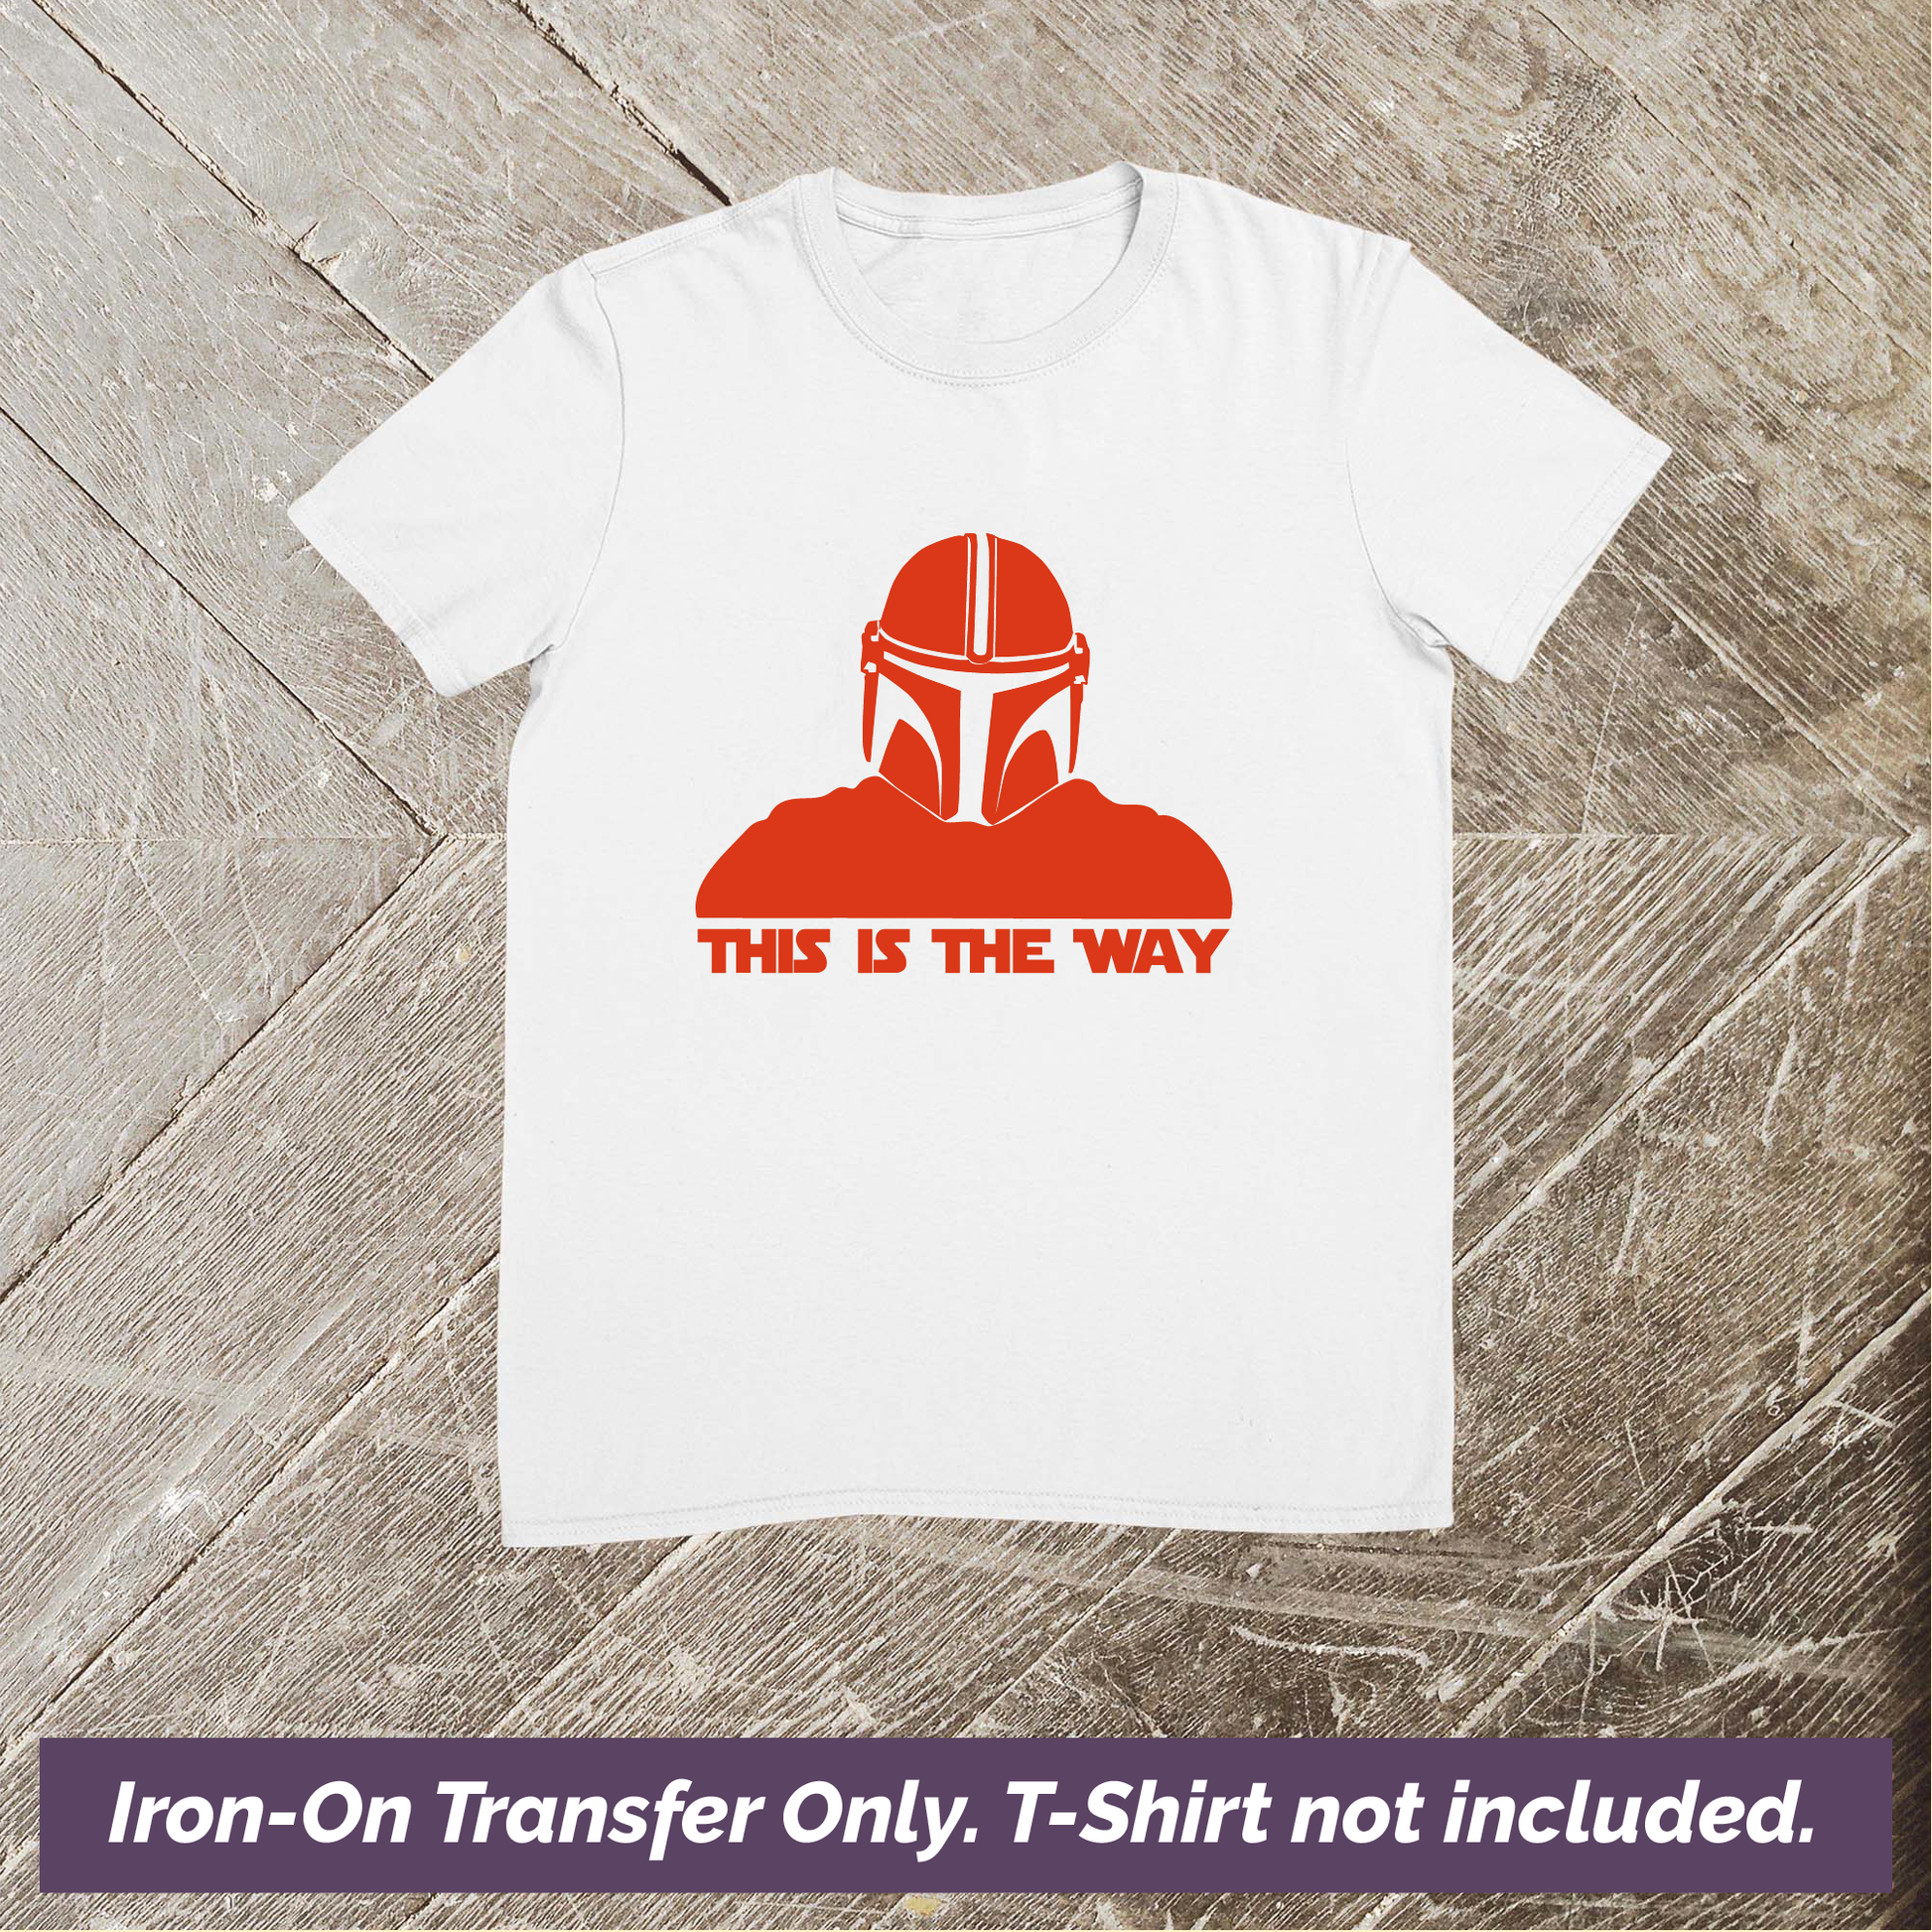 This is the Way Mandalorian Iron-On Heat Transfer Vinyl - Decal Only - Red on white shirt